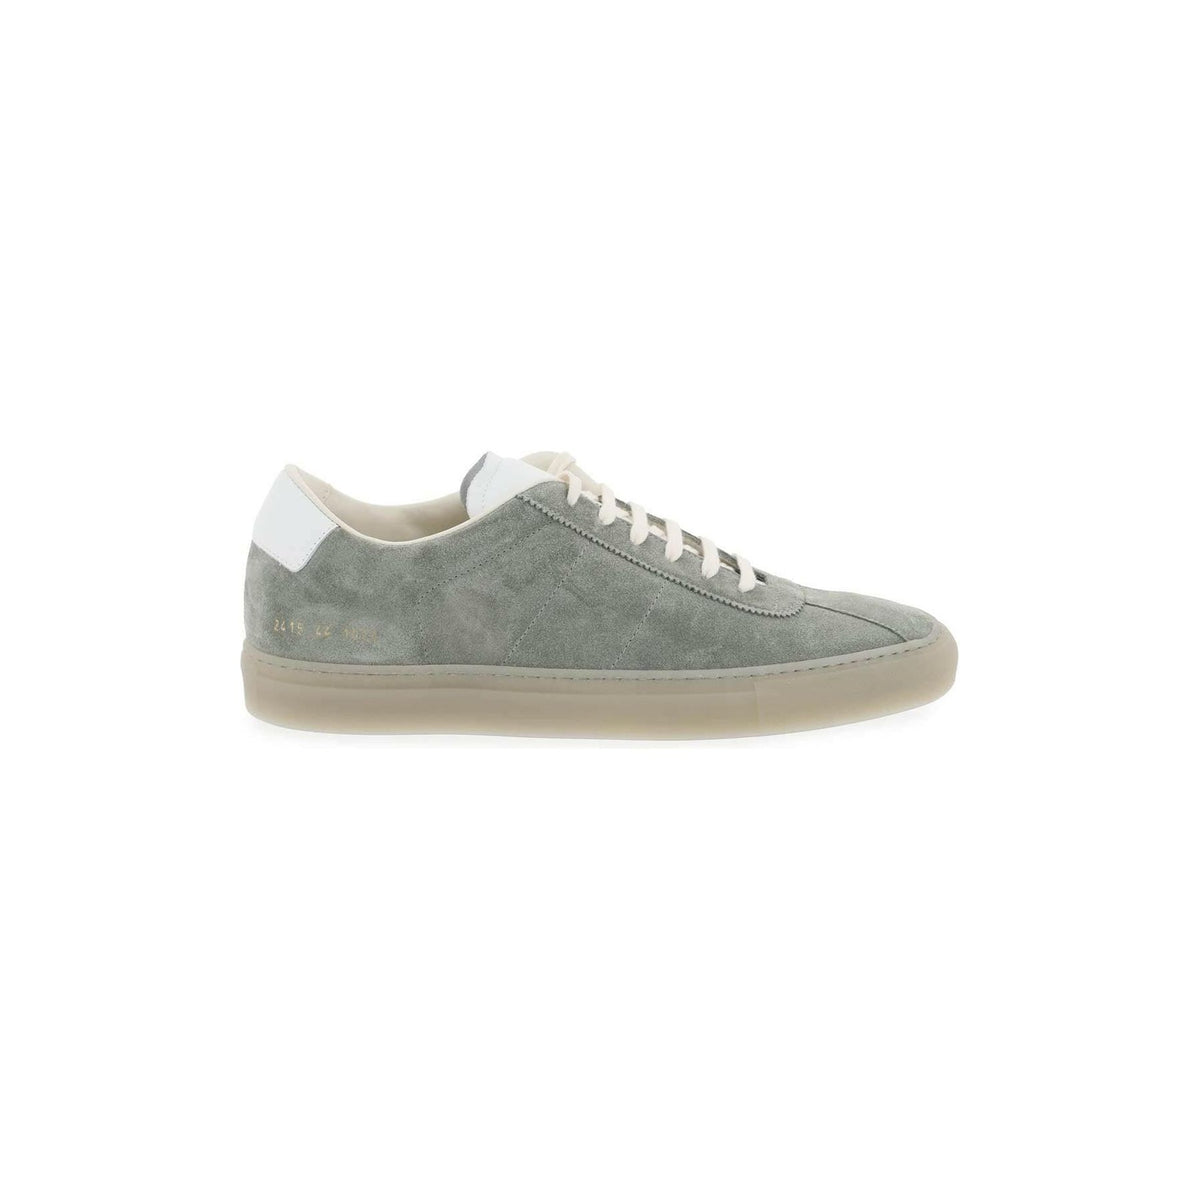 COMMON PROJECTS - Sage Green 70's Tennis Suede Sneakers - JOHN JULIA